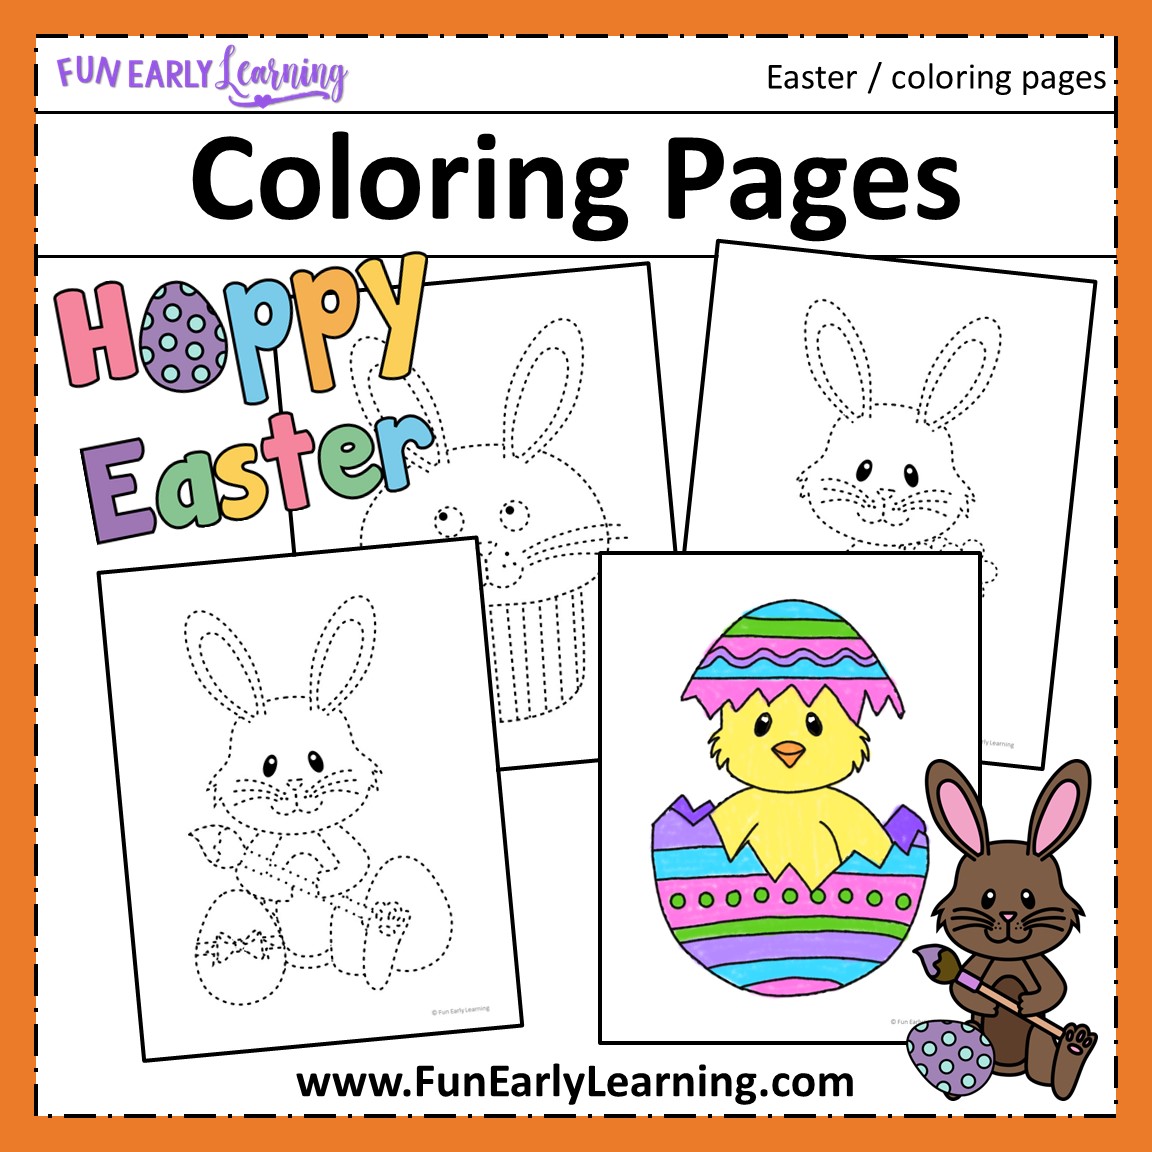 Easter Coloring Pages Printable Free for Preschoolers and Kindergarten